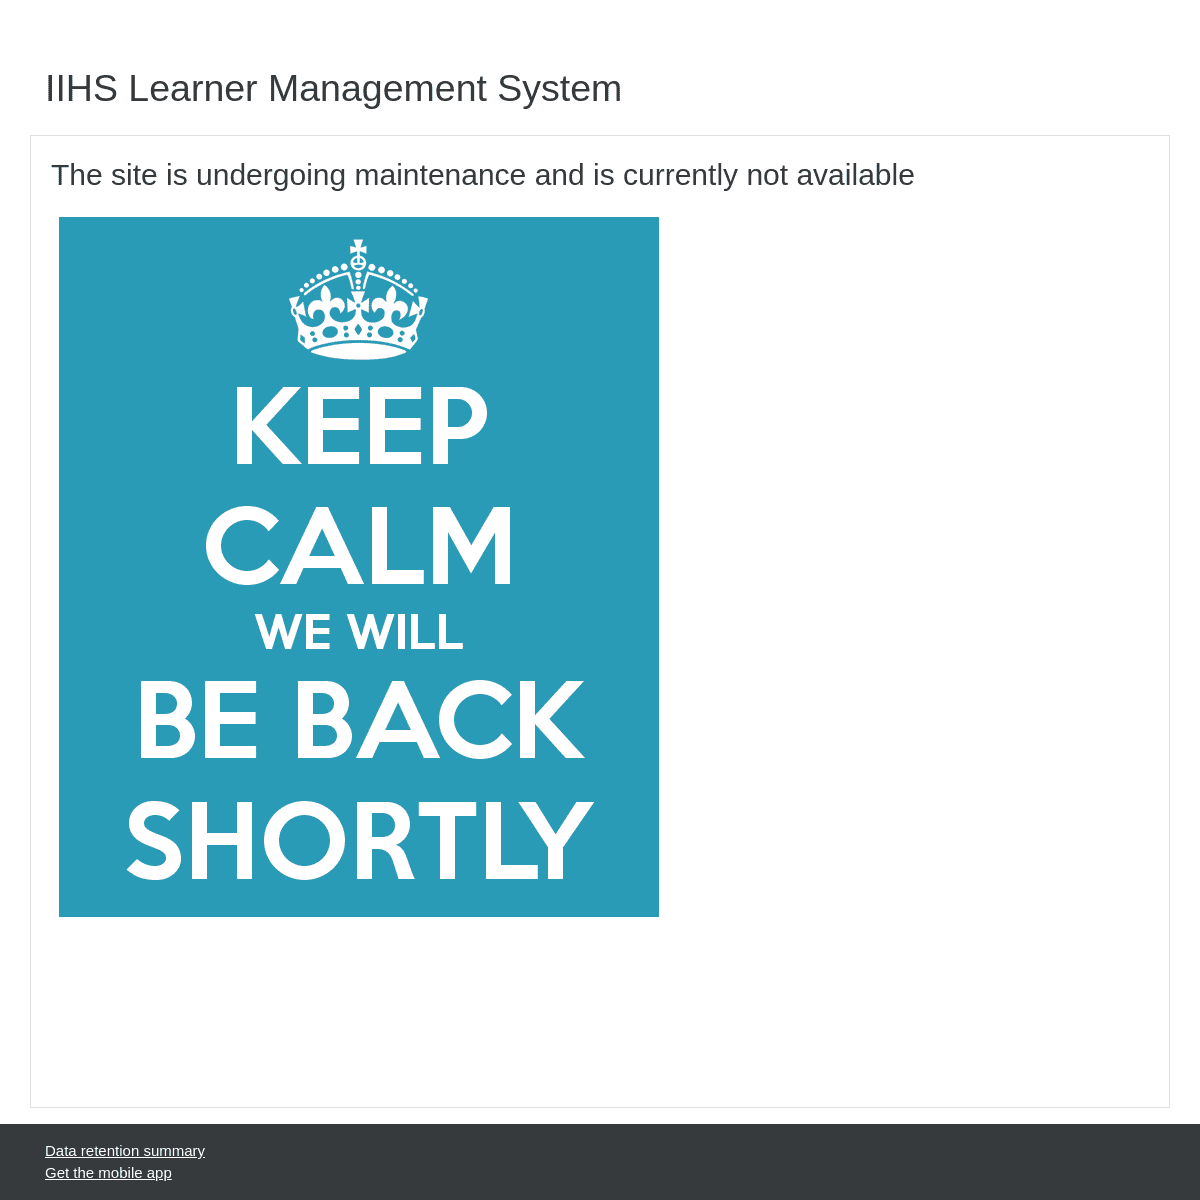 IIHS Learner Management System - In maintenance mode